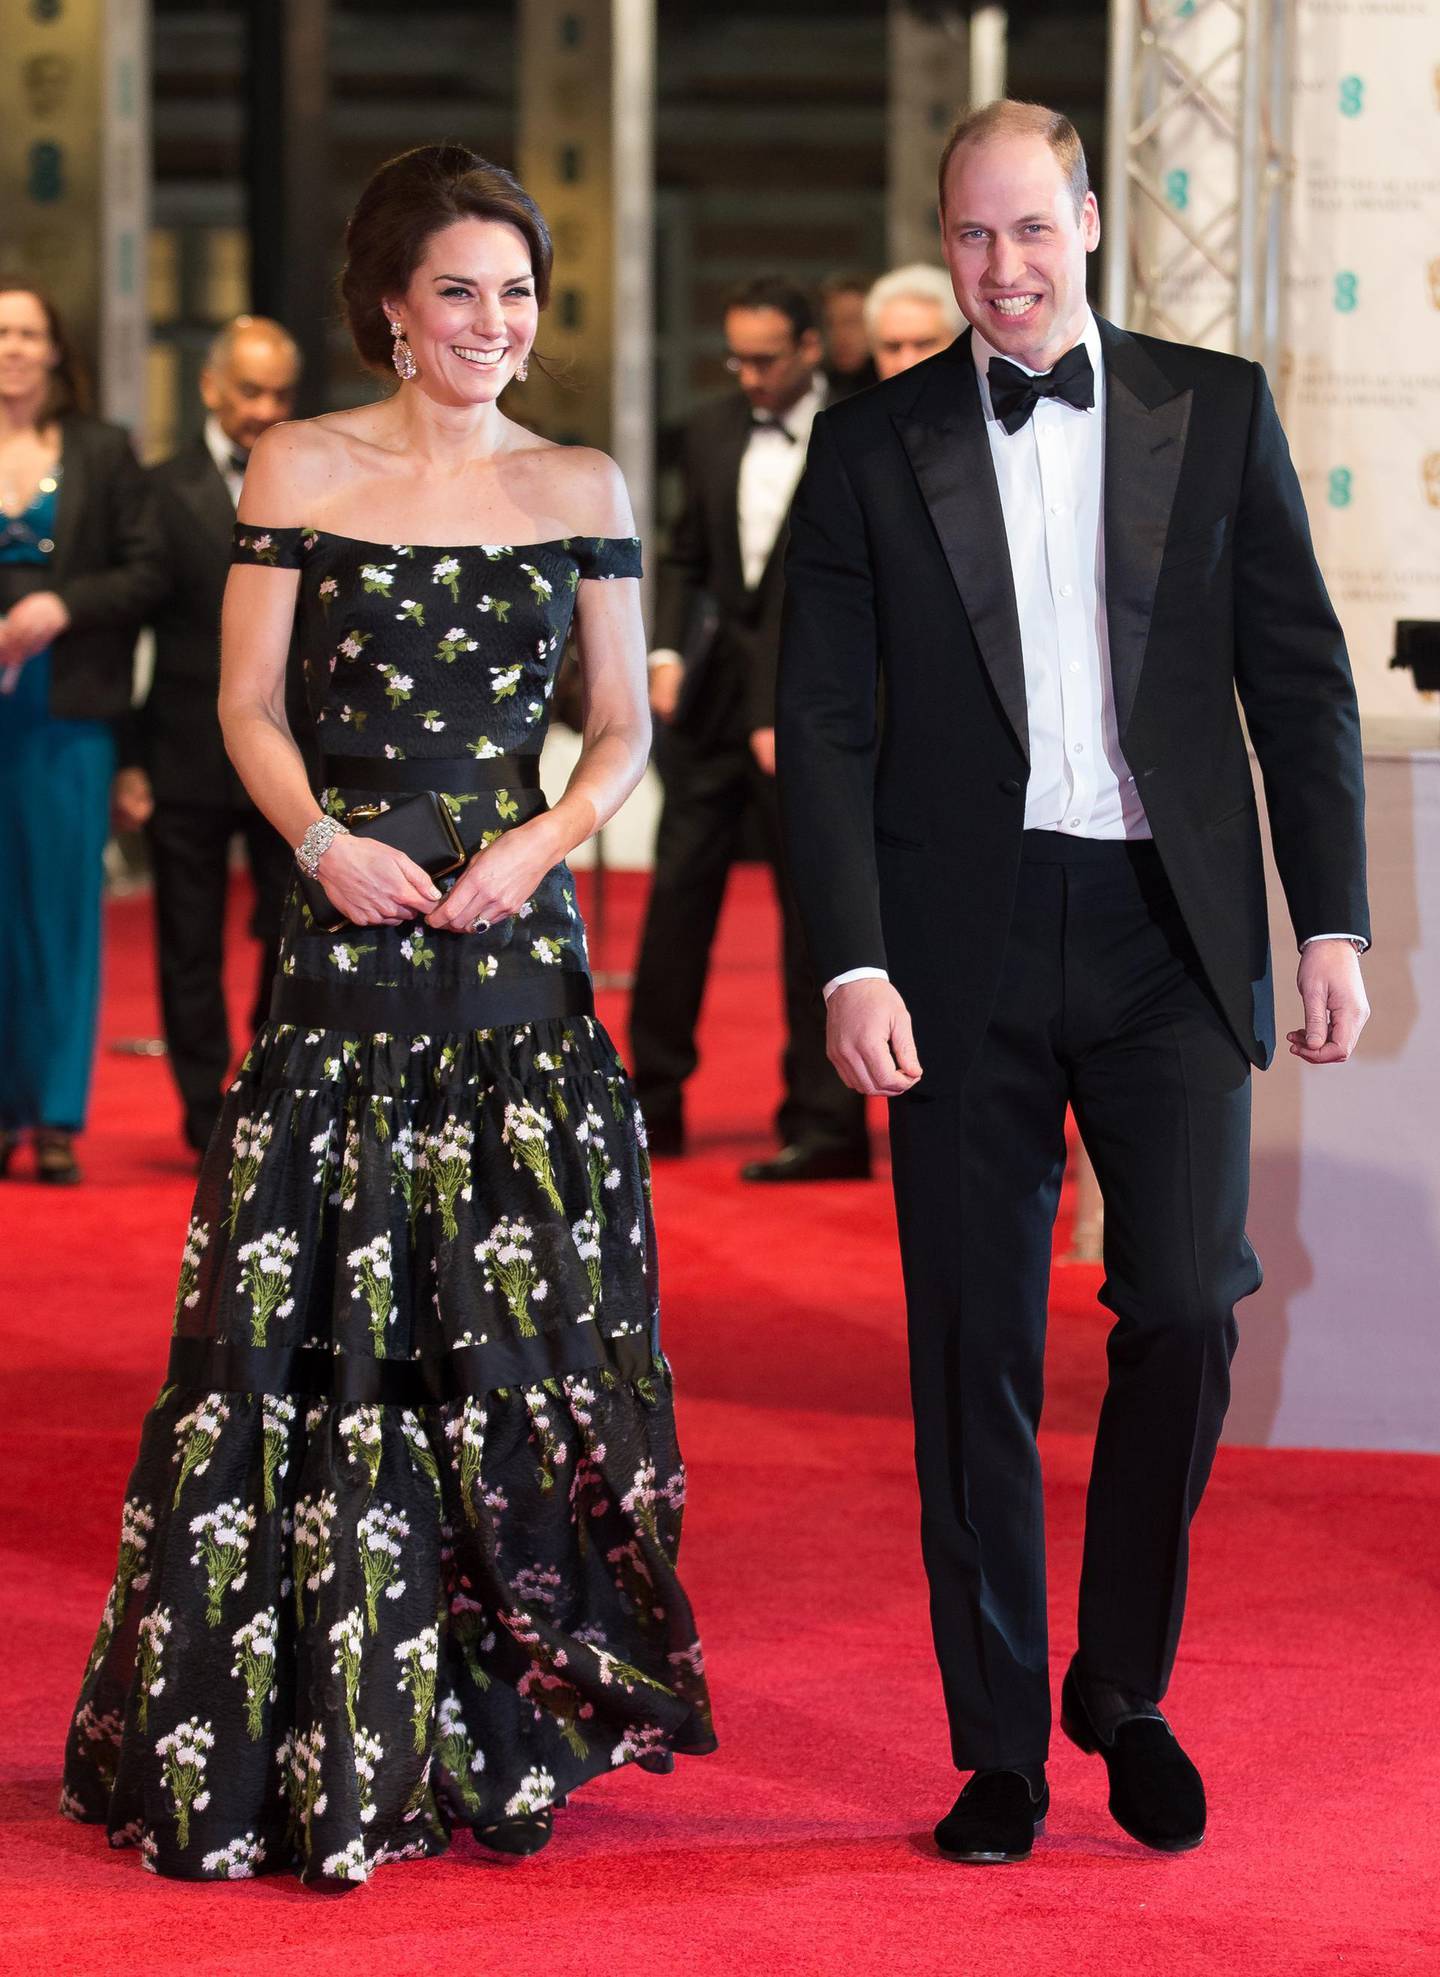 LONDON, ENGLAND - FEBRUARY 12:  Catherine, Duchess of Cambridge and Prince William, Duke of Cambridge attend the 70th EE British Academy Film Awards (BAFTA) at the Royal Albert Hall on February 12, 2017 in London, England.  (Photo by Daniel Leal-Olivas- WPA Pool/Getty Images)